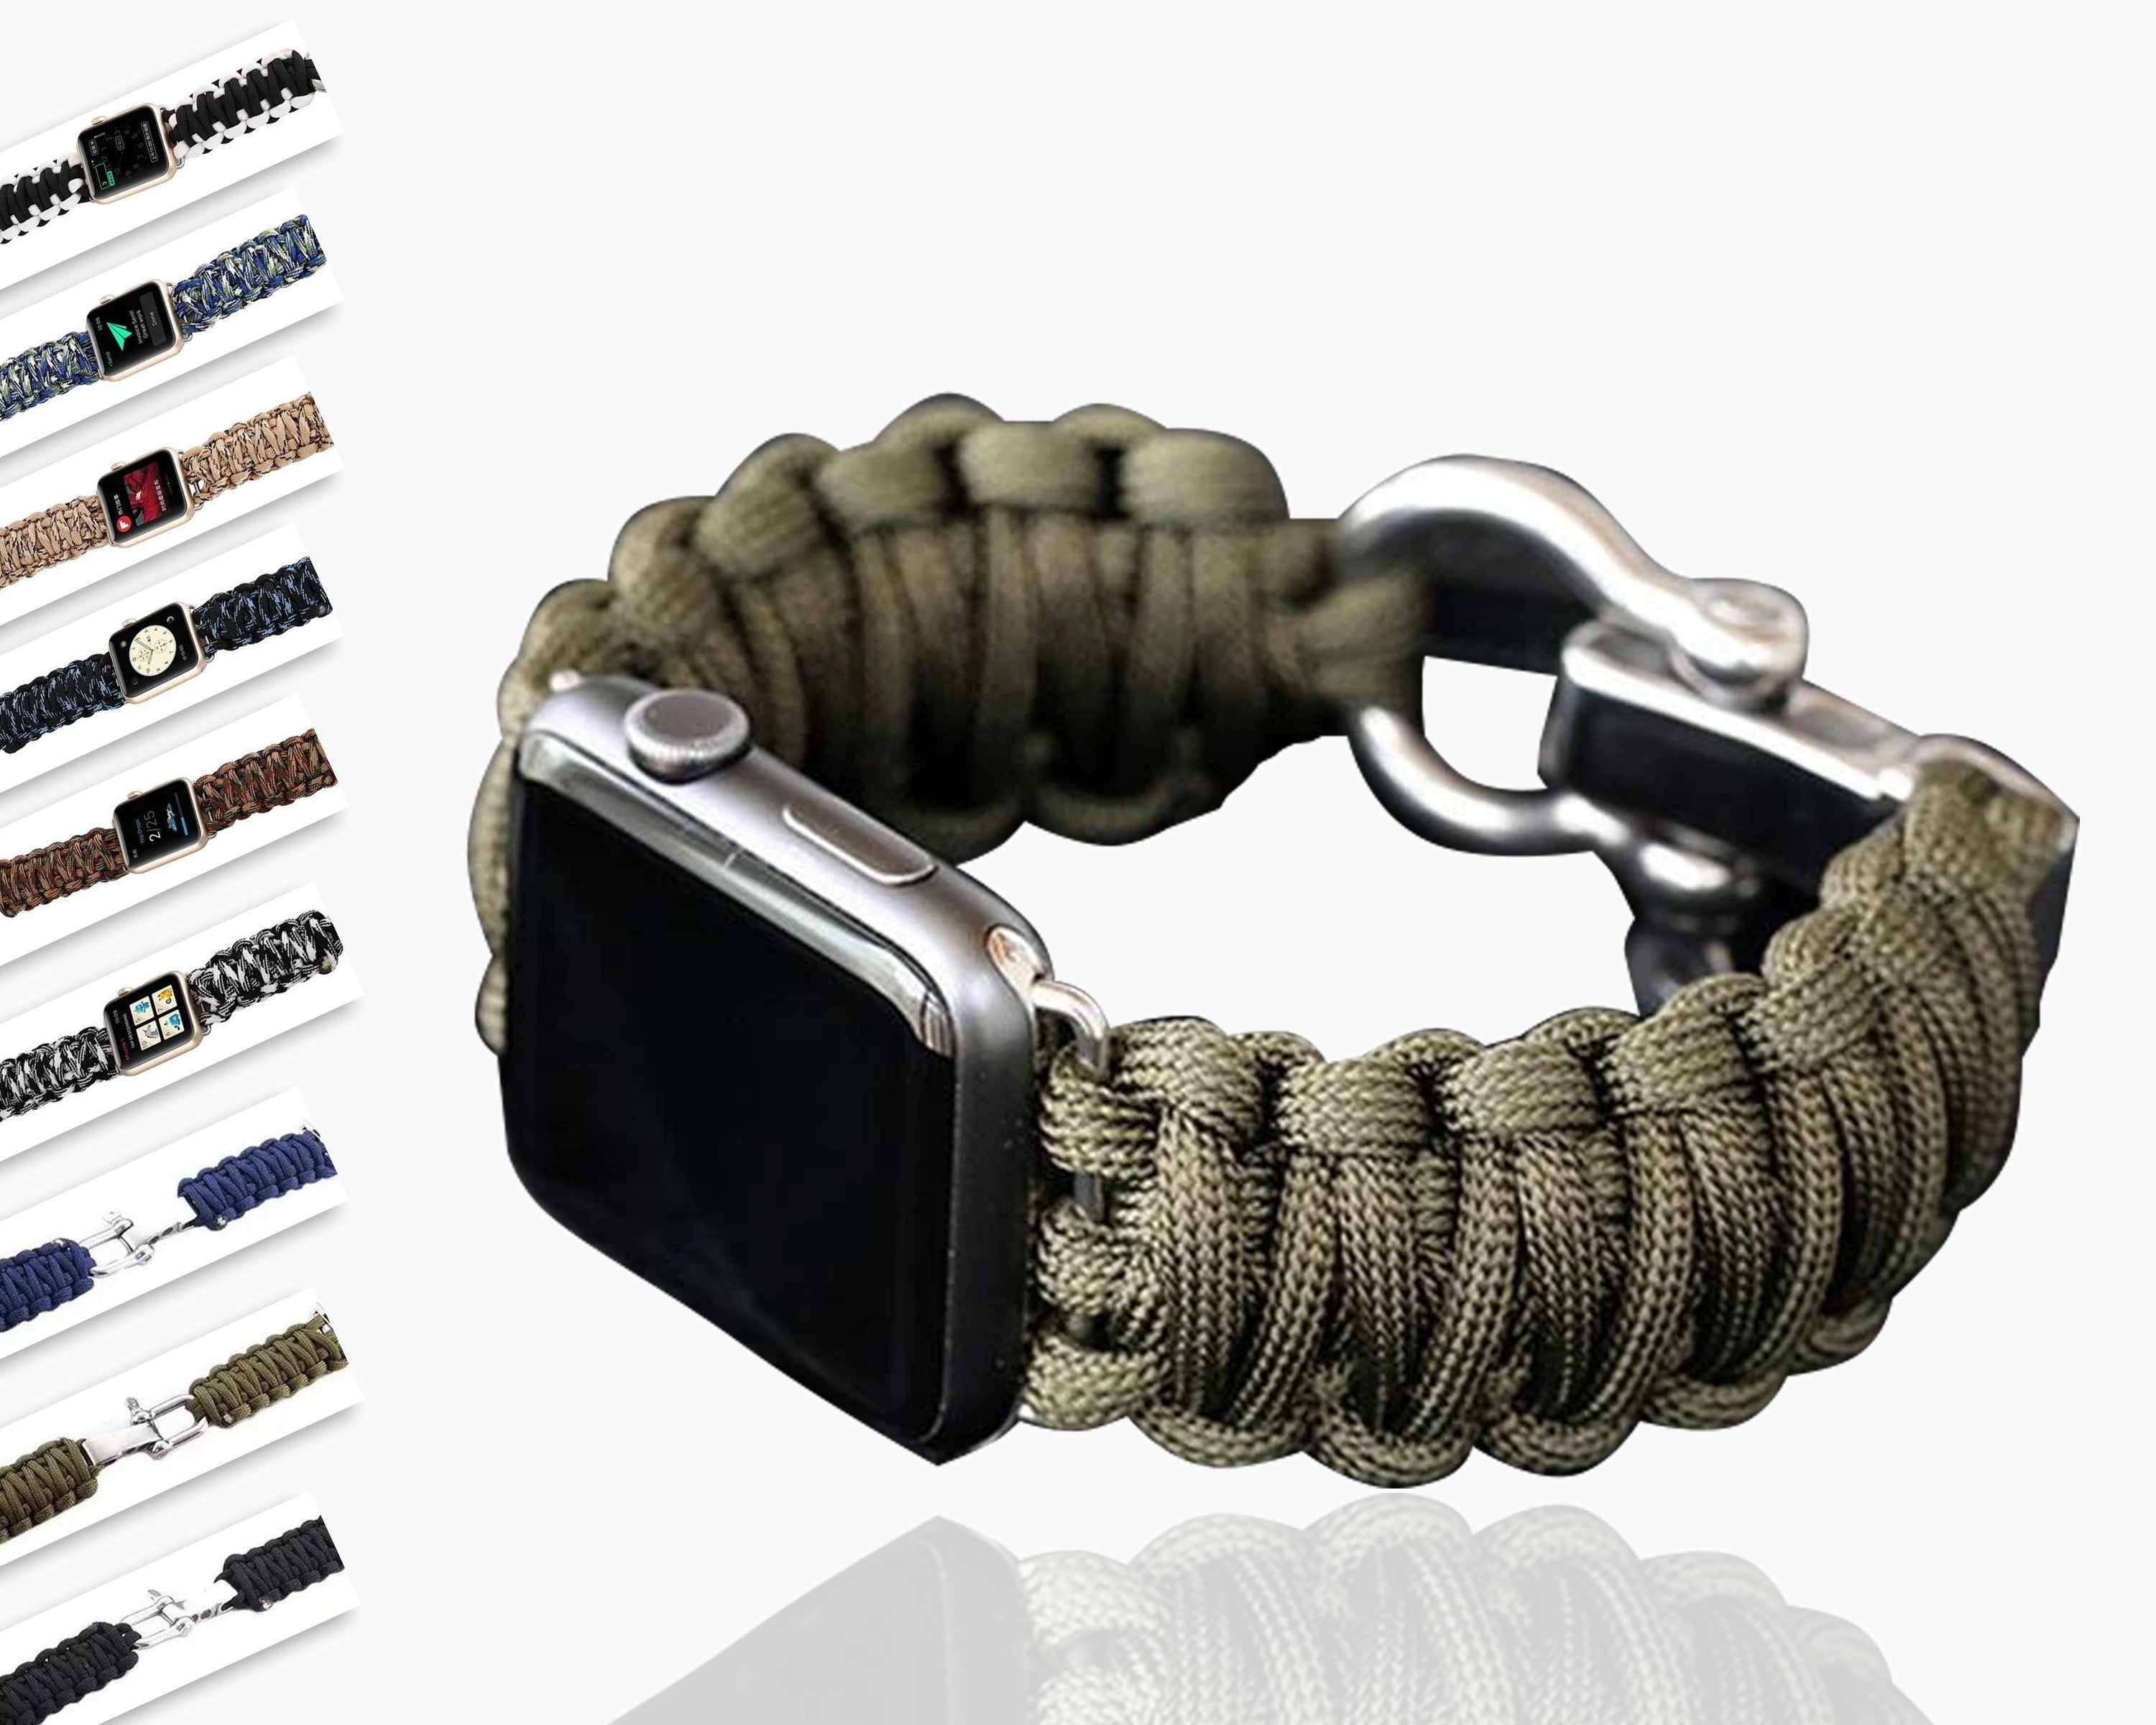 Jollychic Watches Store Paracord Rope Army Sport Strap 7 6 5 Military Tactical Survival Style Blue / 42mm, 44mm, 45mm